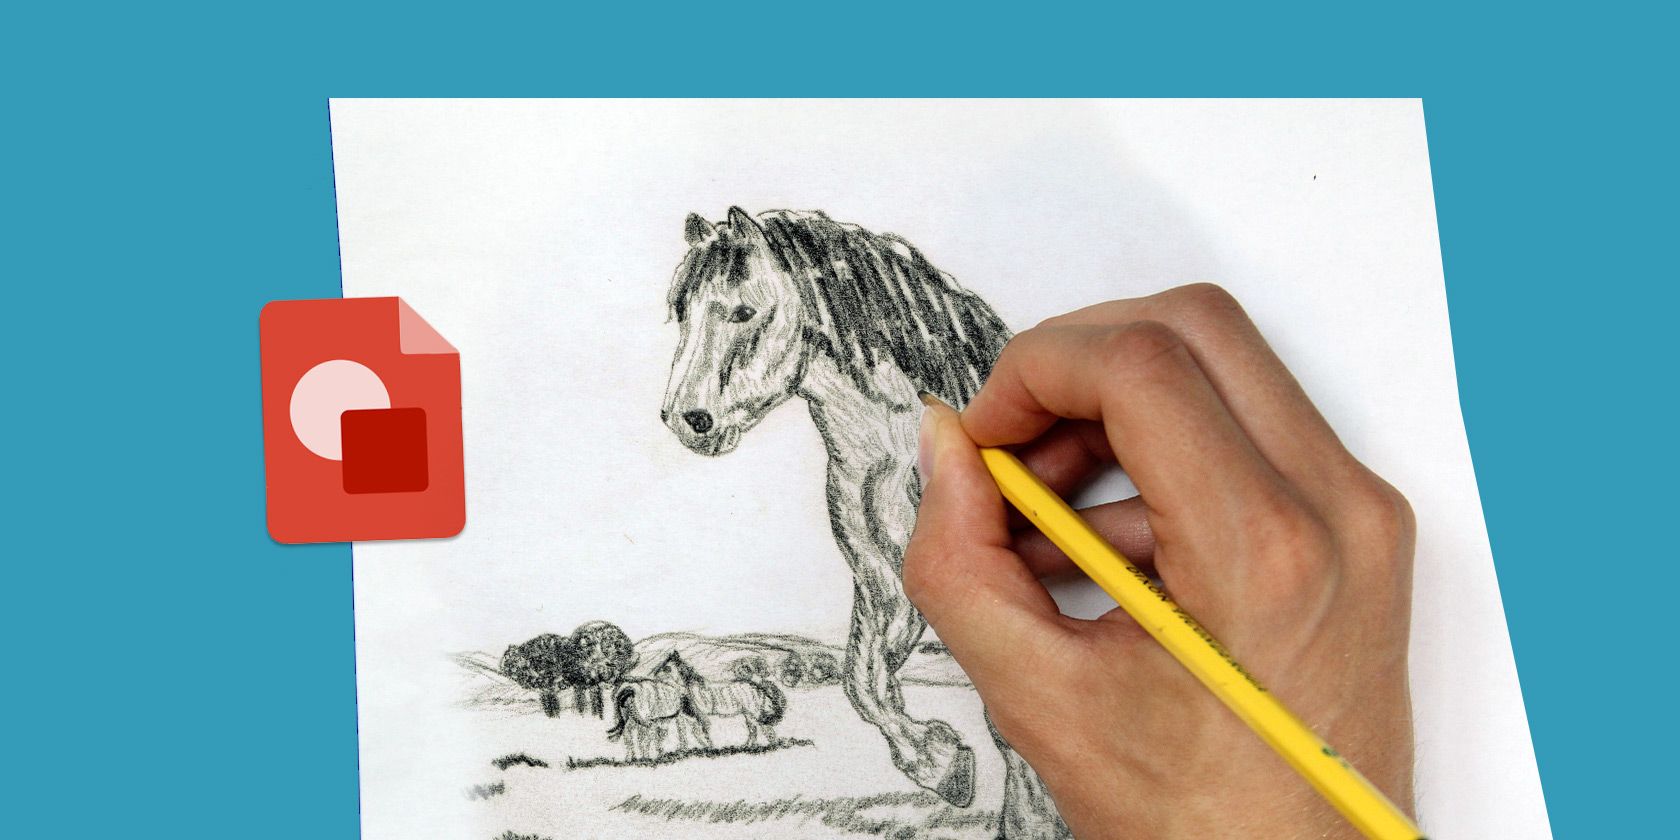 How to draw anything - learn sketching for beginners | Julia Bausenhardt